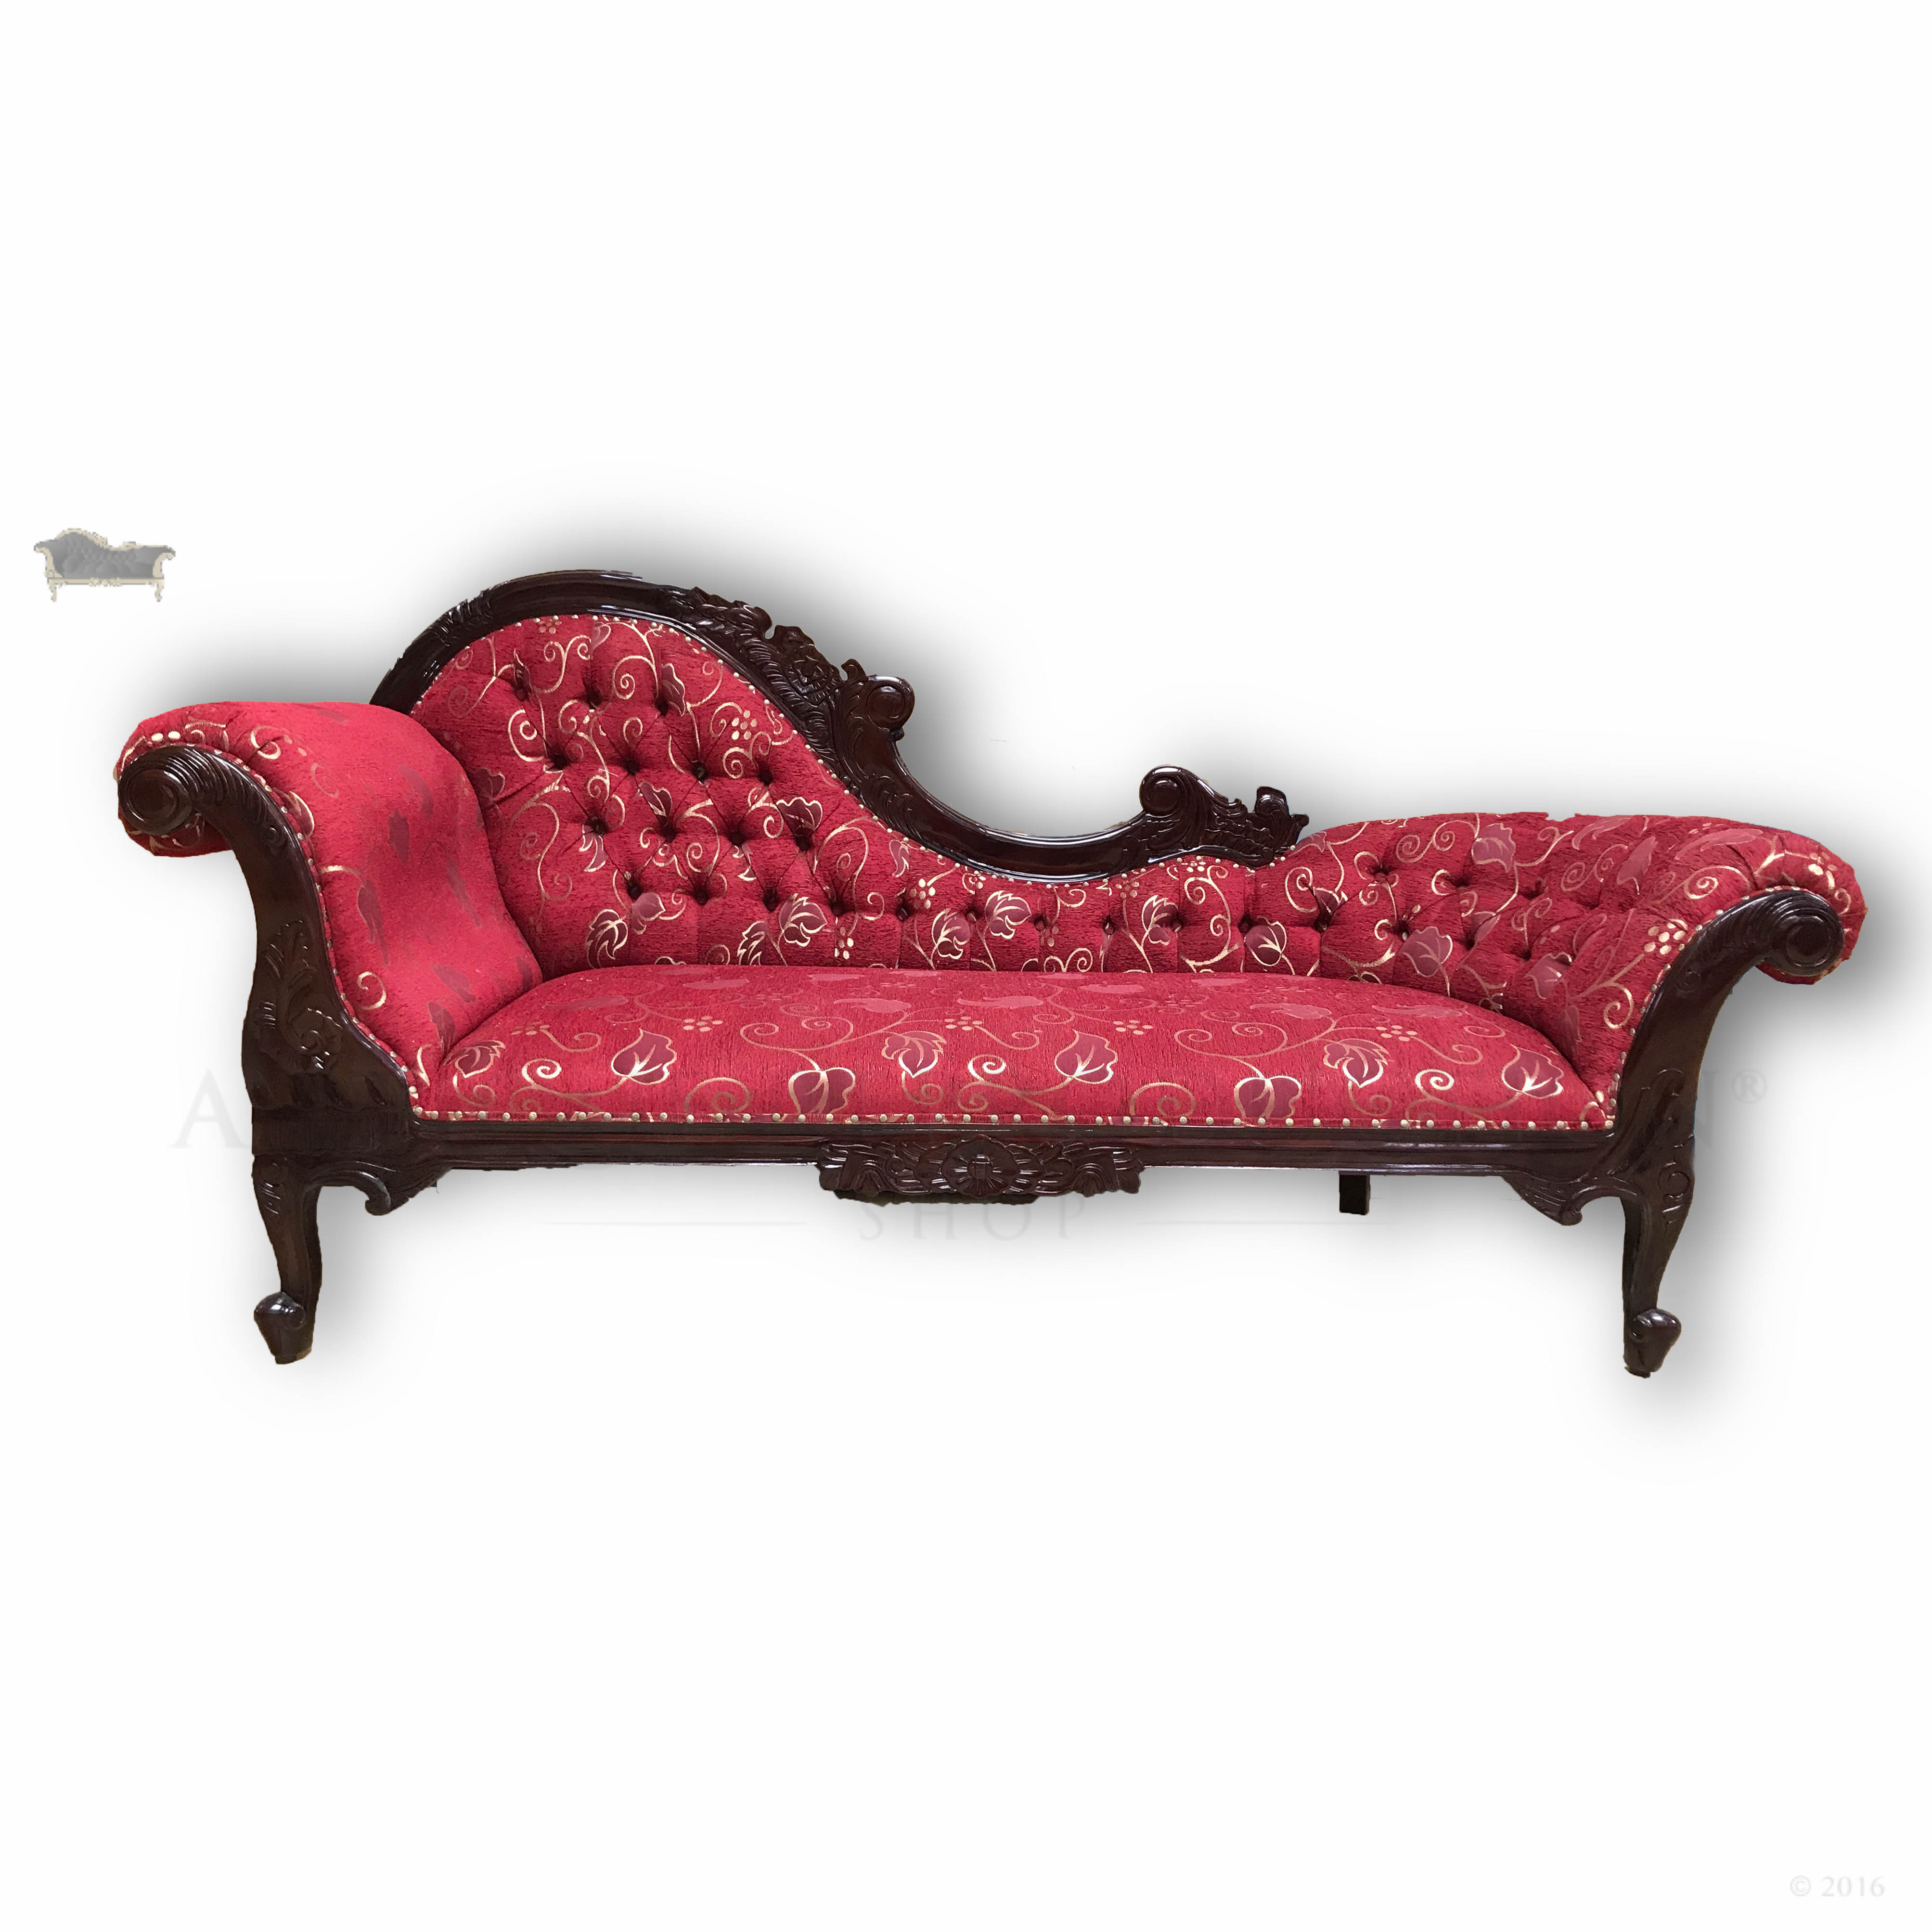 Red Chaise Lounge photo - 5